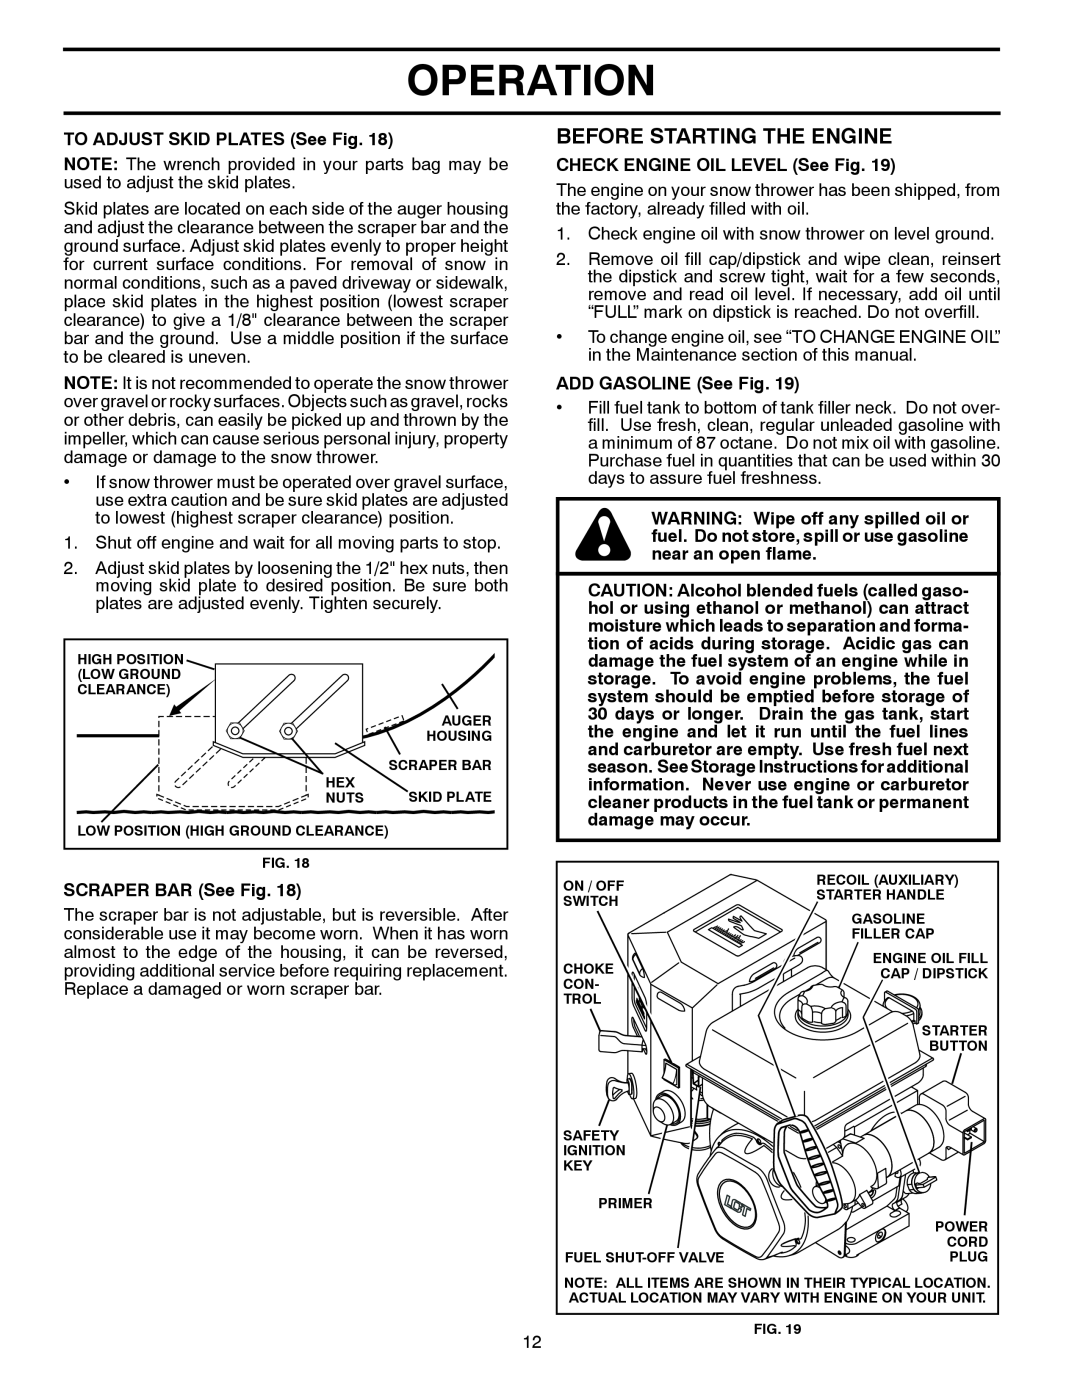 Poulan 429890 owner manual Before Starting The Engine, Operation, TO ADJUST SKID PLATES See Fig, SCRAPER BAR See Fig 